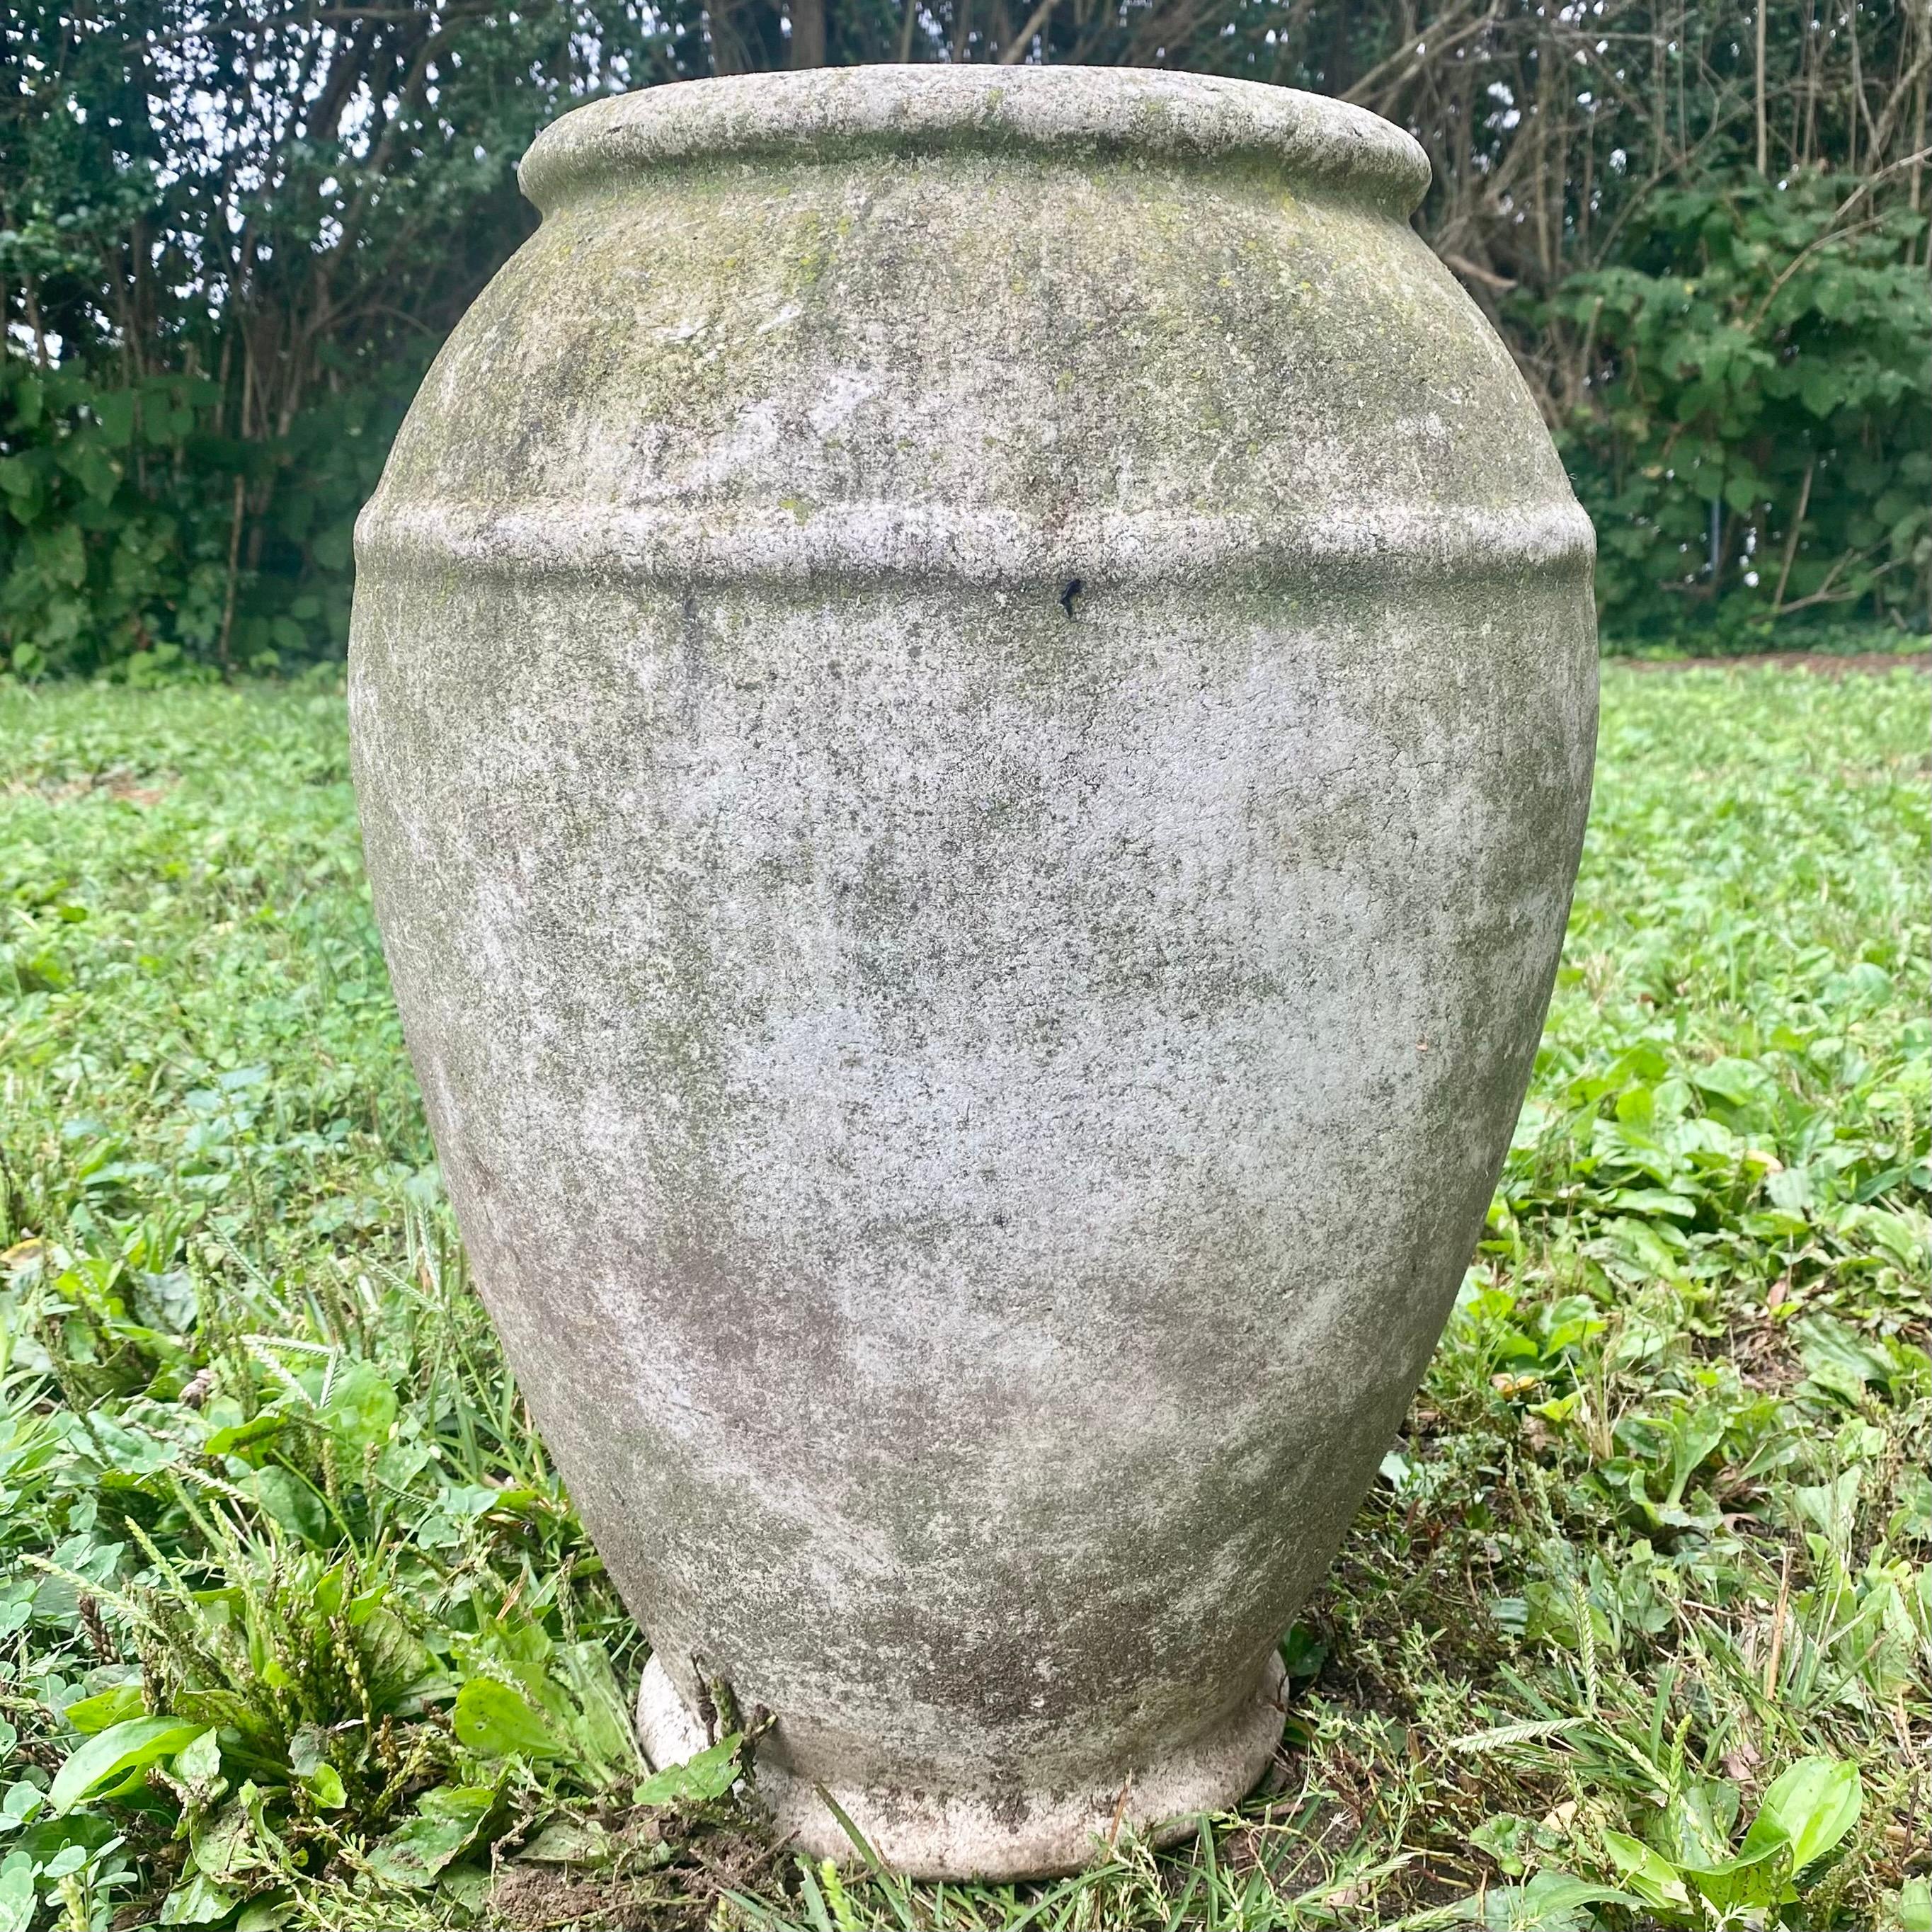 Concrete urns by Willy Guhl. Three available with varying degrees of patina and lichen. Rare model. Urns have a delicate cement ridge around the mouth as well as around the widest part of the jar giving it depth and delicate lines. The body of the